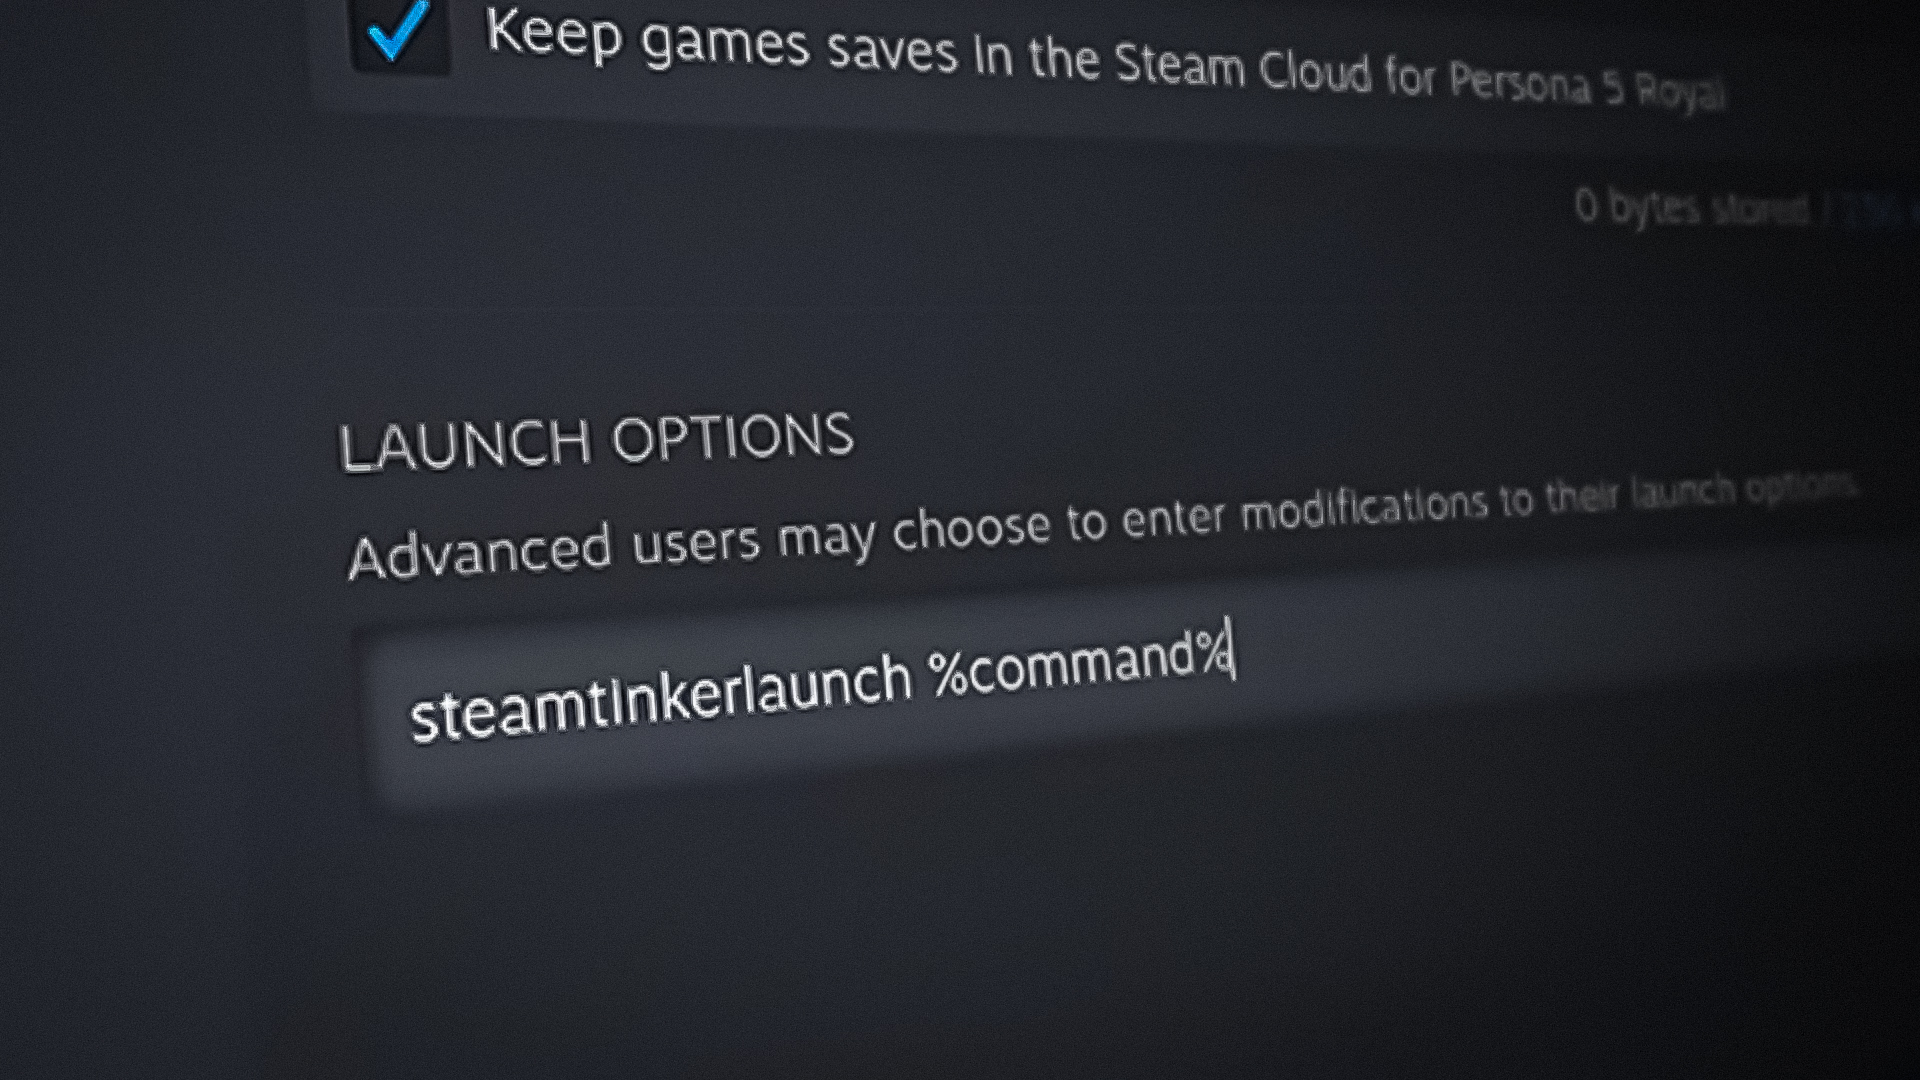 Steam Game Launch Options Settings